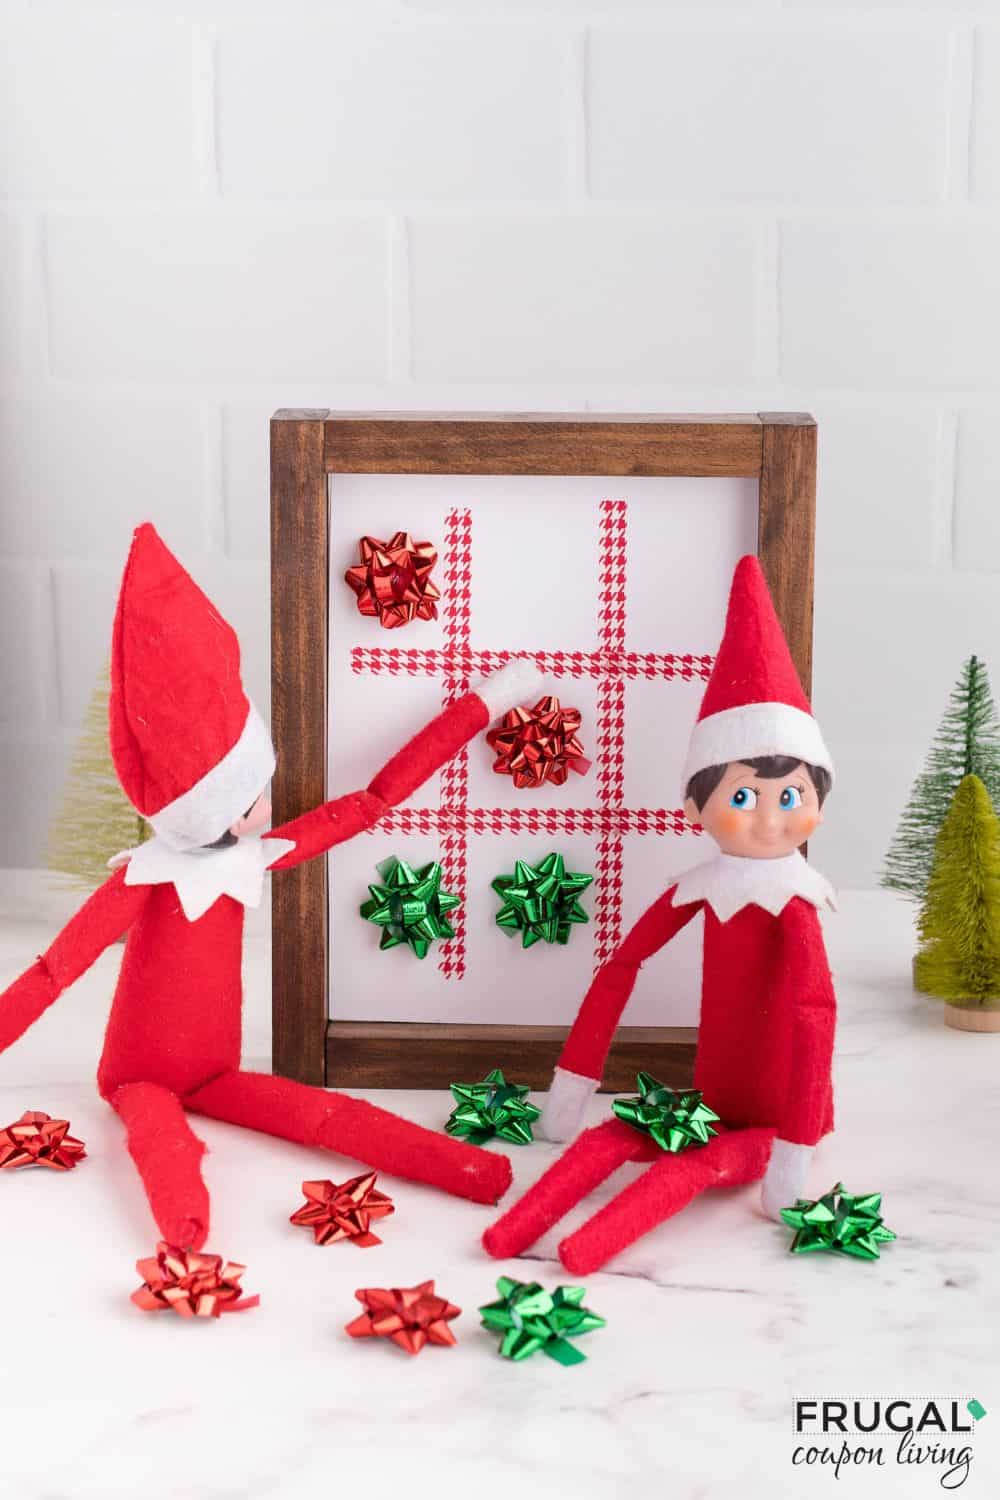 diy elf on the shelf tic tac toe xs and os using bows